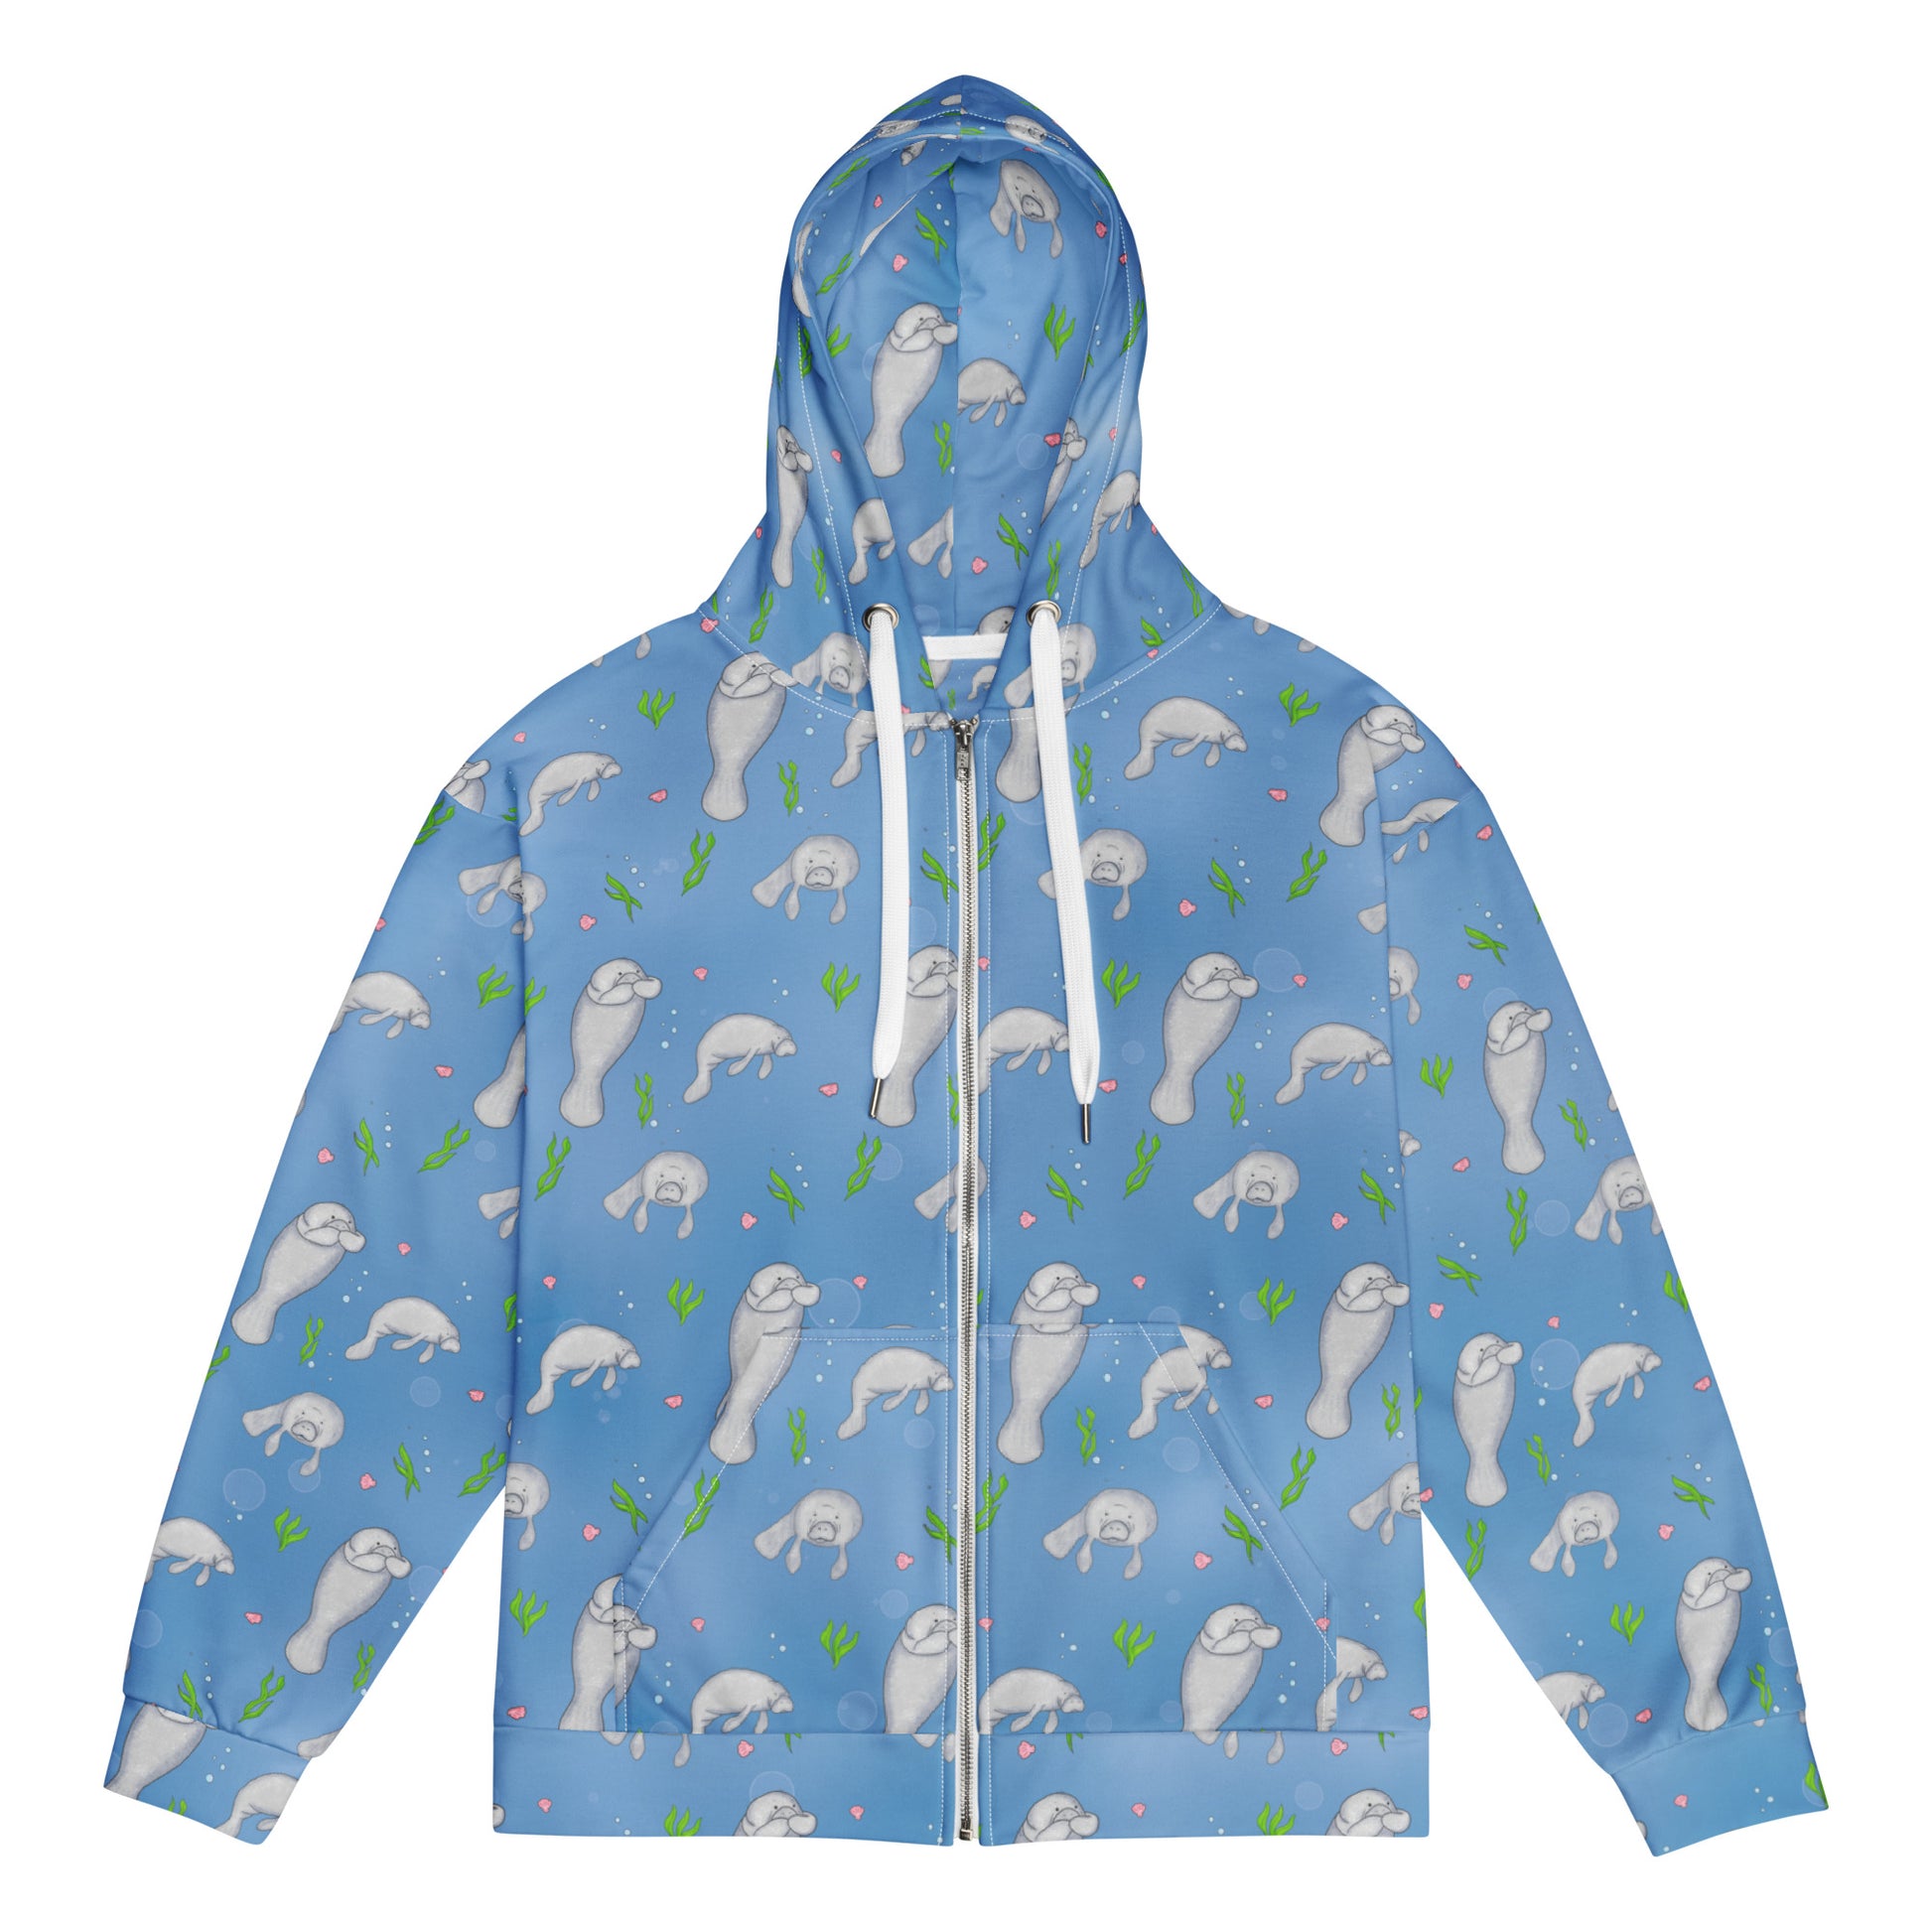 Unisex patterned manatee zip up hoodie. Made with recycled polyester. Soft cotton-feel outside fabric and fleece inside. Metal zipper, eyelets, and drawcord tips.